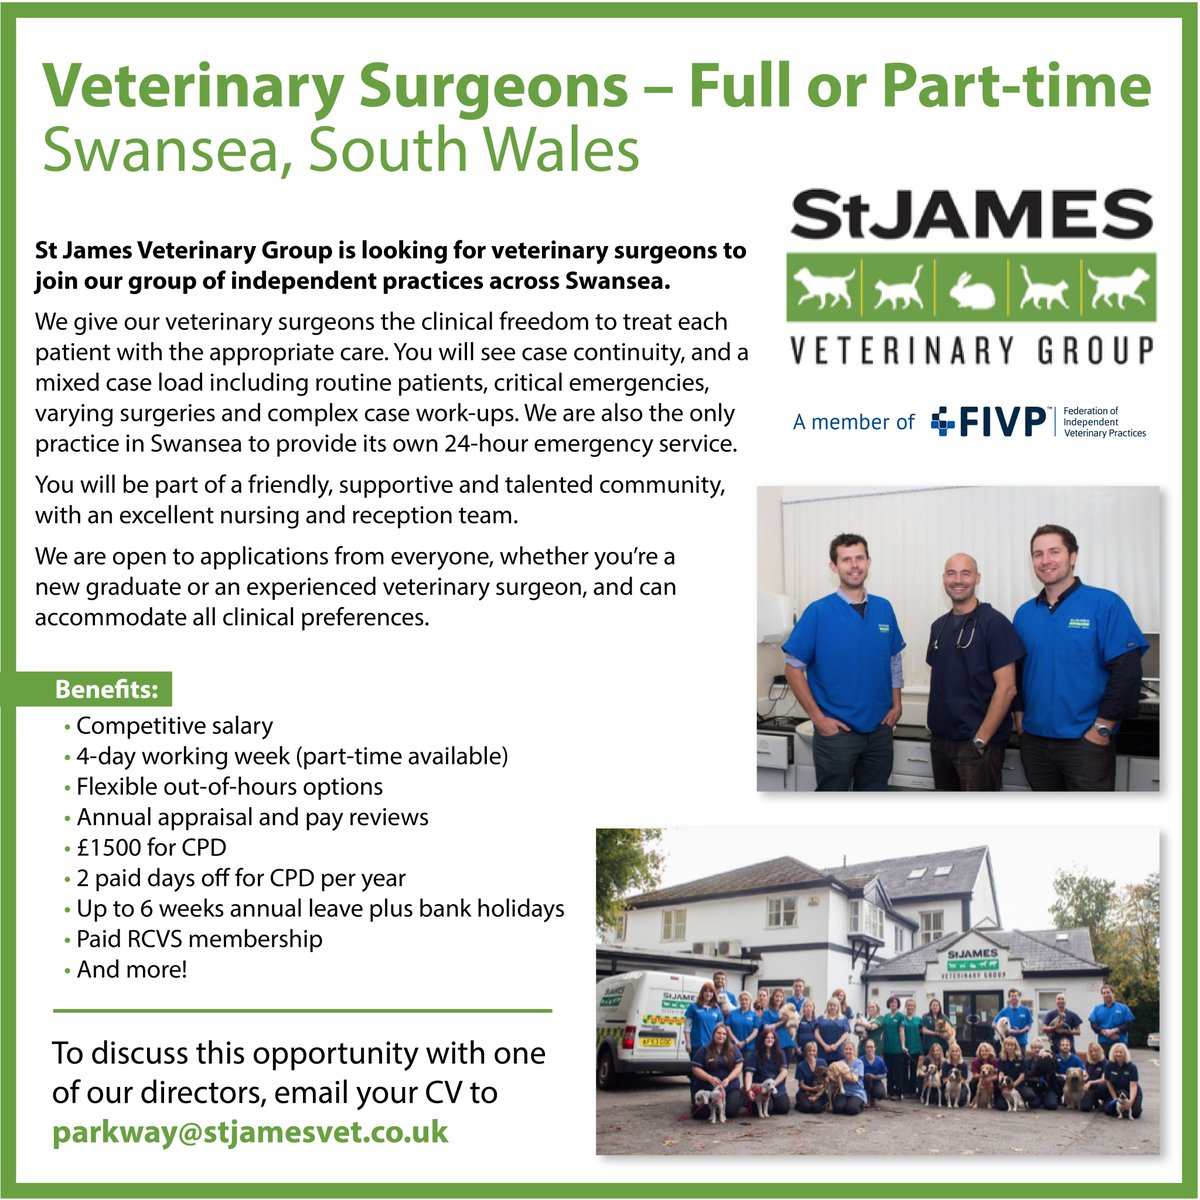 Enjoy the clinical freedom of #independentpractice at St James Veterinary Group!

You will see a varied caseload, working with a supportive team to provide the best #veterinary care to our clients.

Open to graduates and experienced vets!

#veterinarycareers #Swansea #Wales